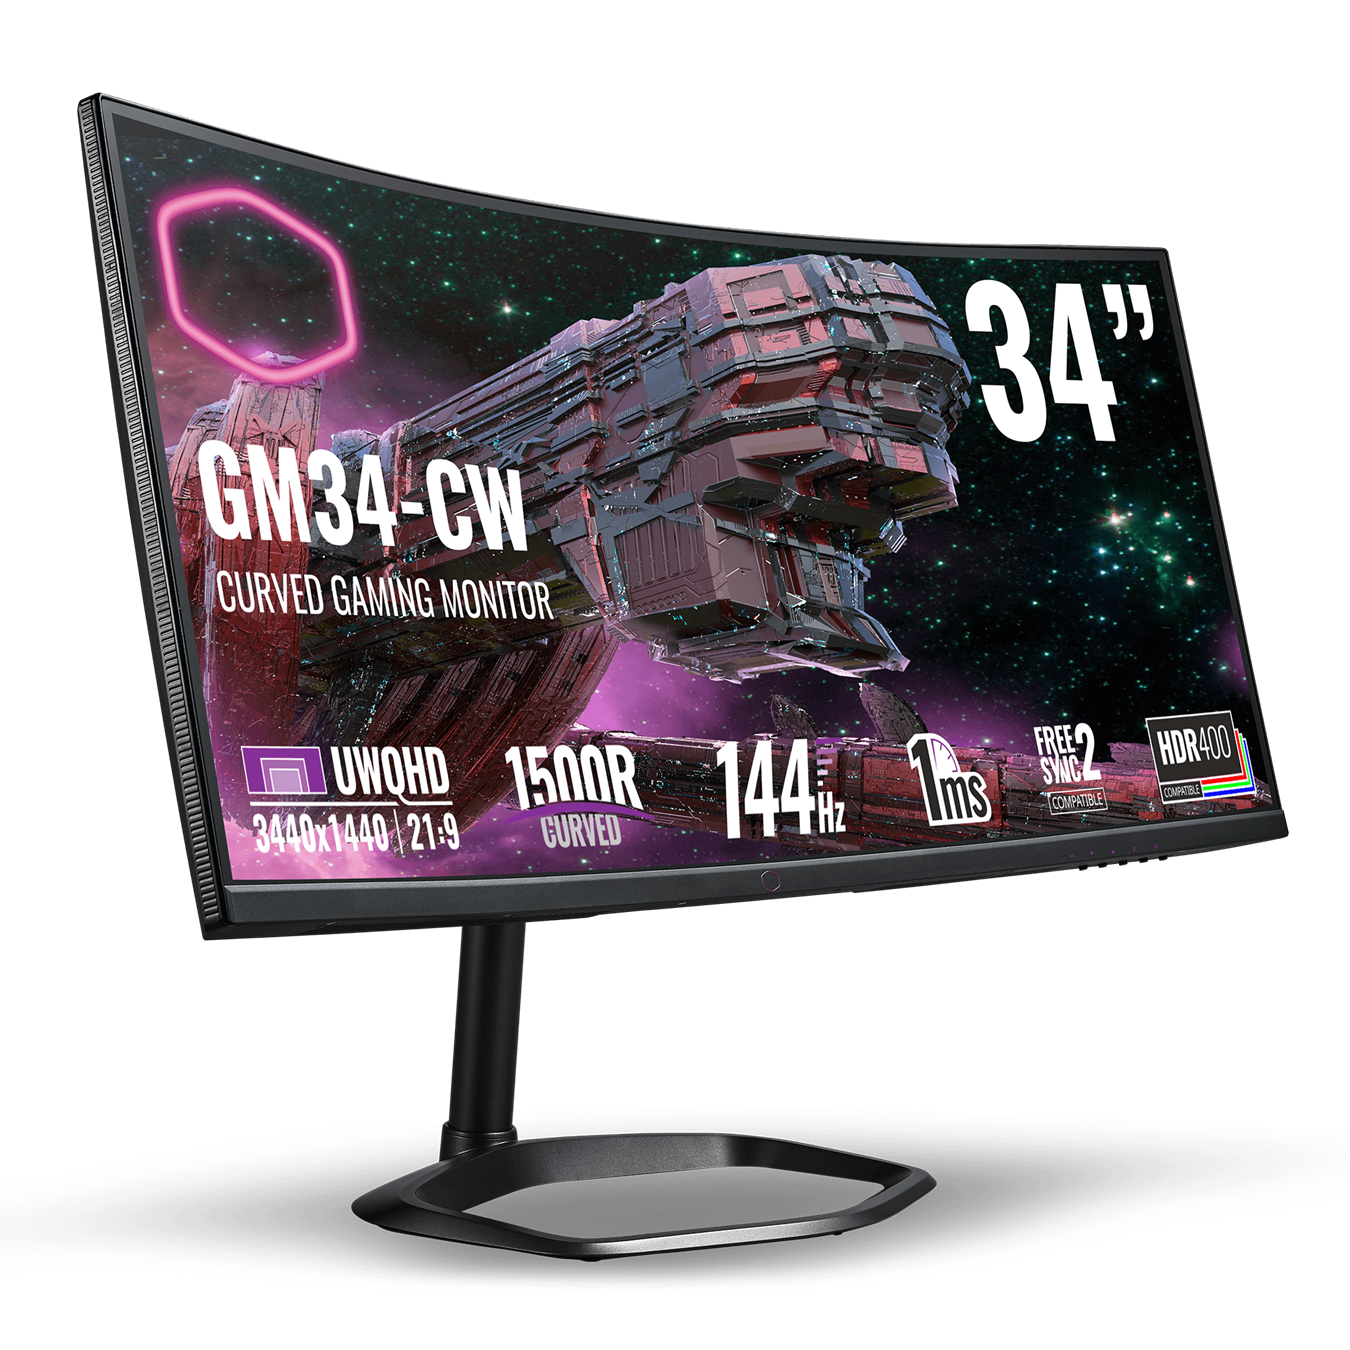 GM34-CW is designed for users to have an awesomely smooth gameplay experience with maximized display quality of game scenes. 